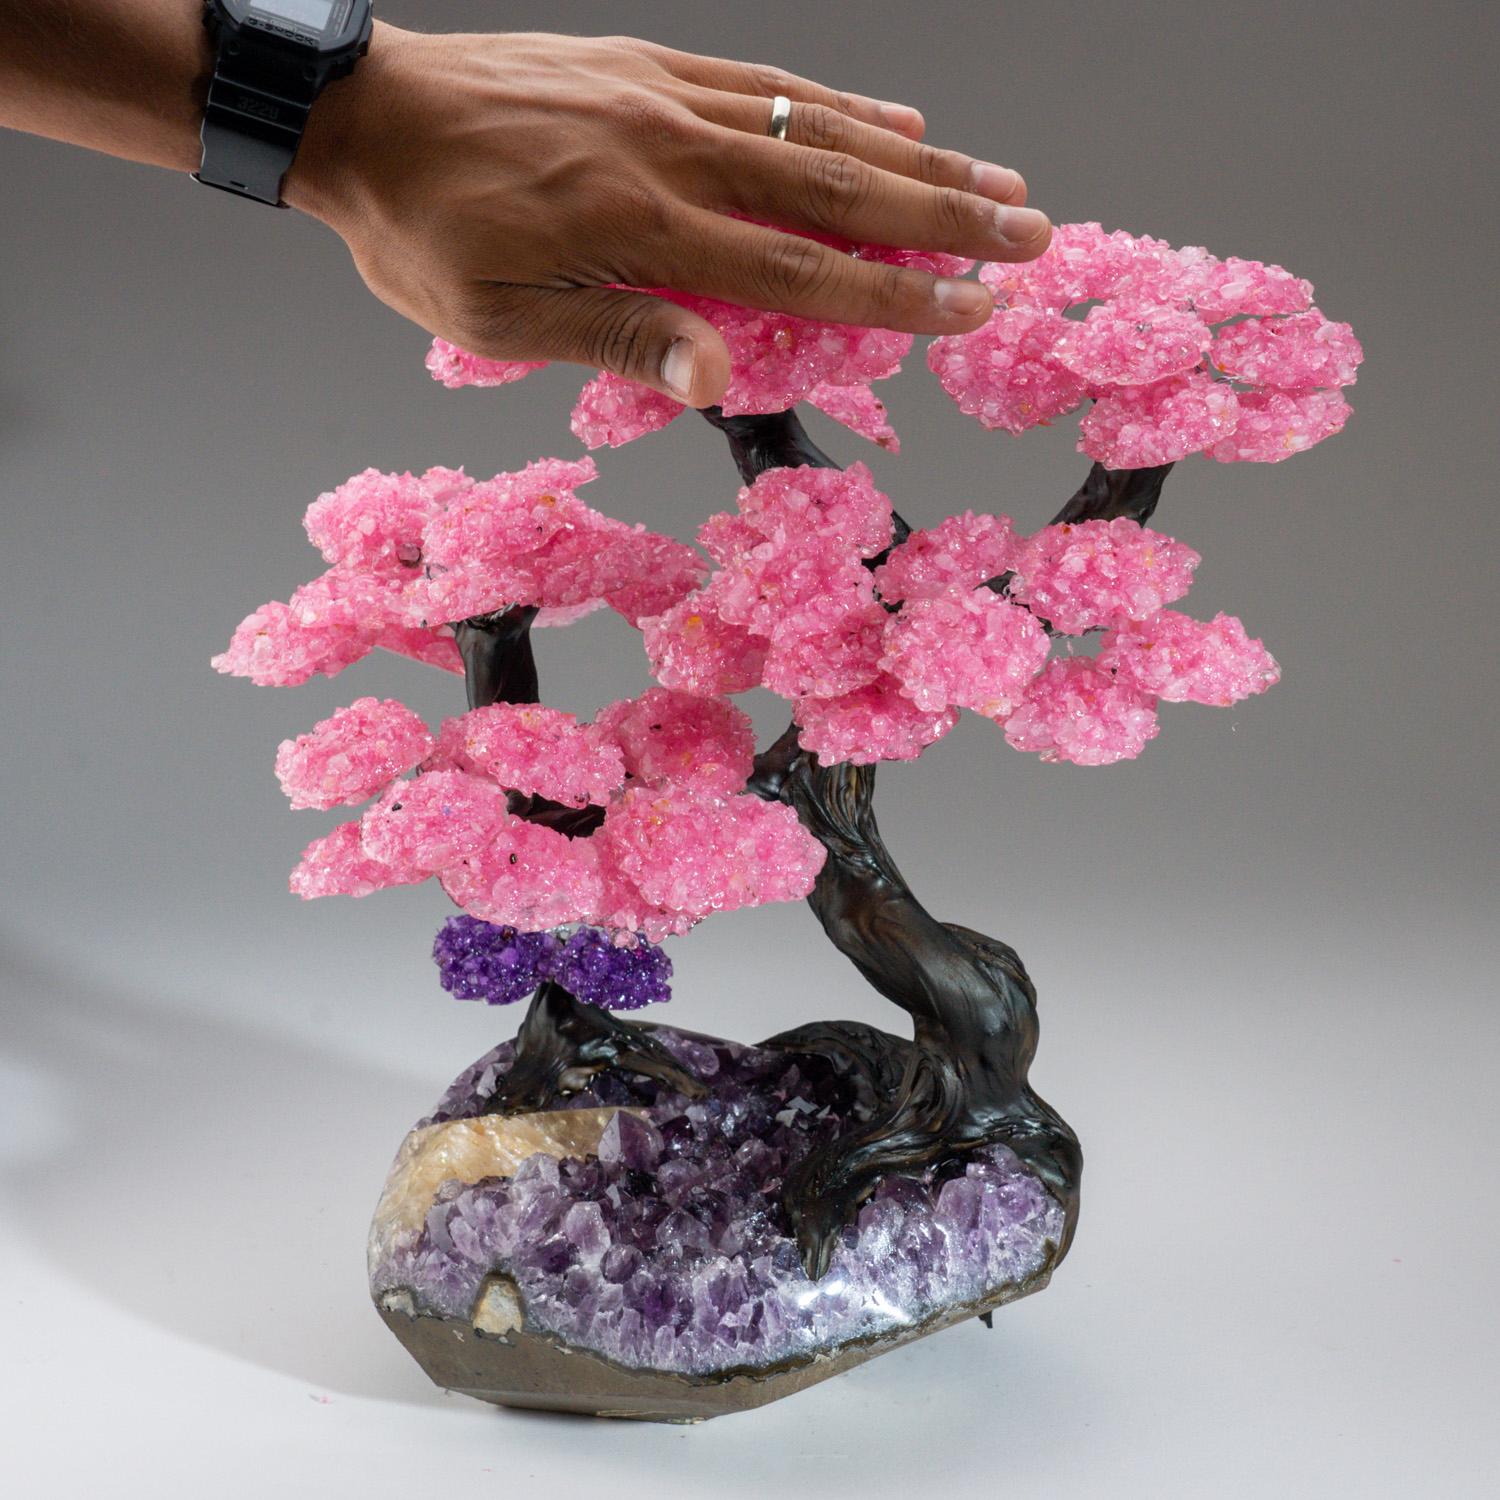 Genuine Rose Quartz clustered gemstone tree with faux tree trunk set on a large grape purple Amethyst crystal cluster on matrix - handmade in Uruguay. 